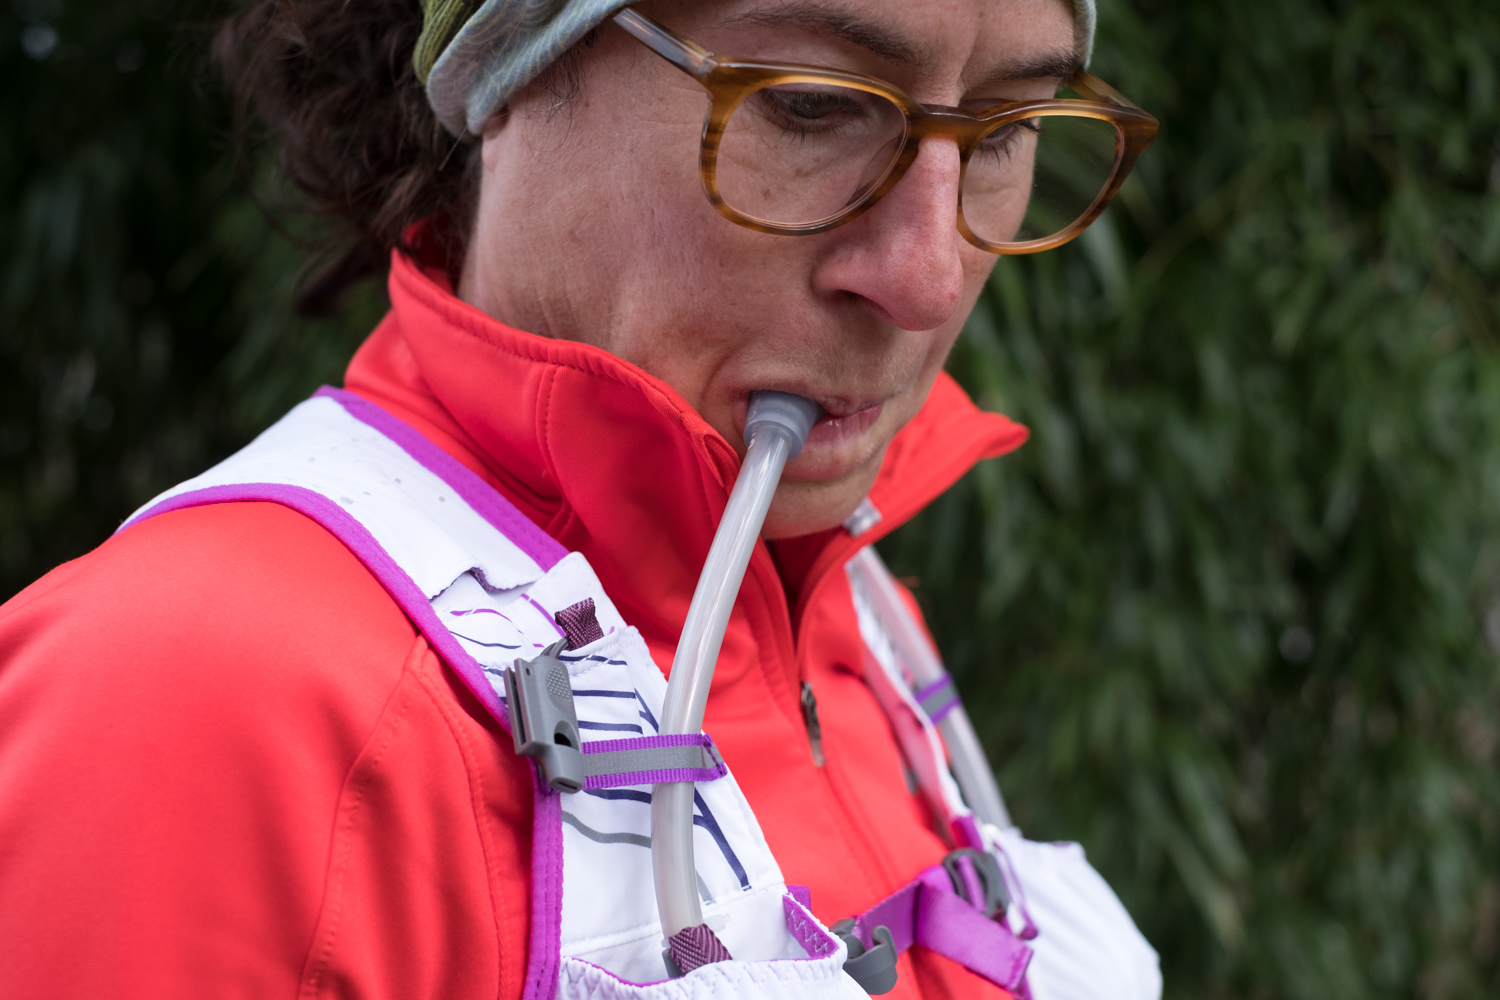 A photo of the VaporHowe 4L 2.0 Ultralight Race Vest that uses two 20oz soft flasks with at-the-ready straws that are easy to drink out of.